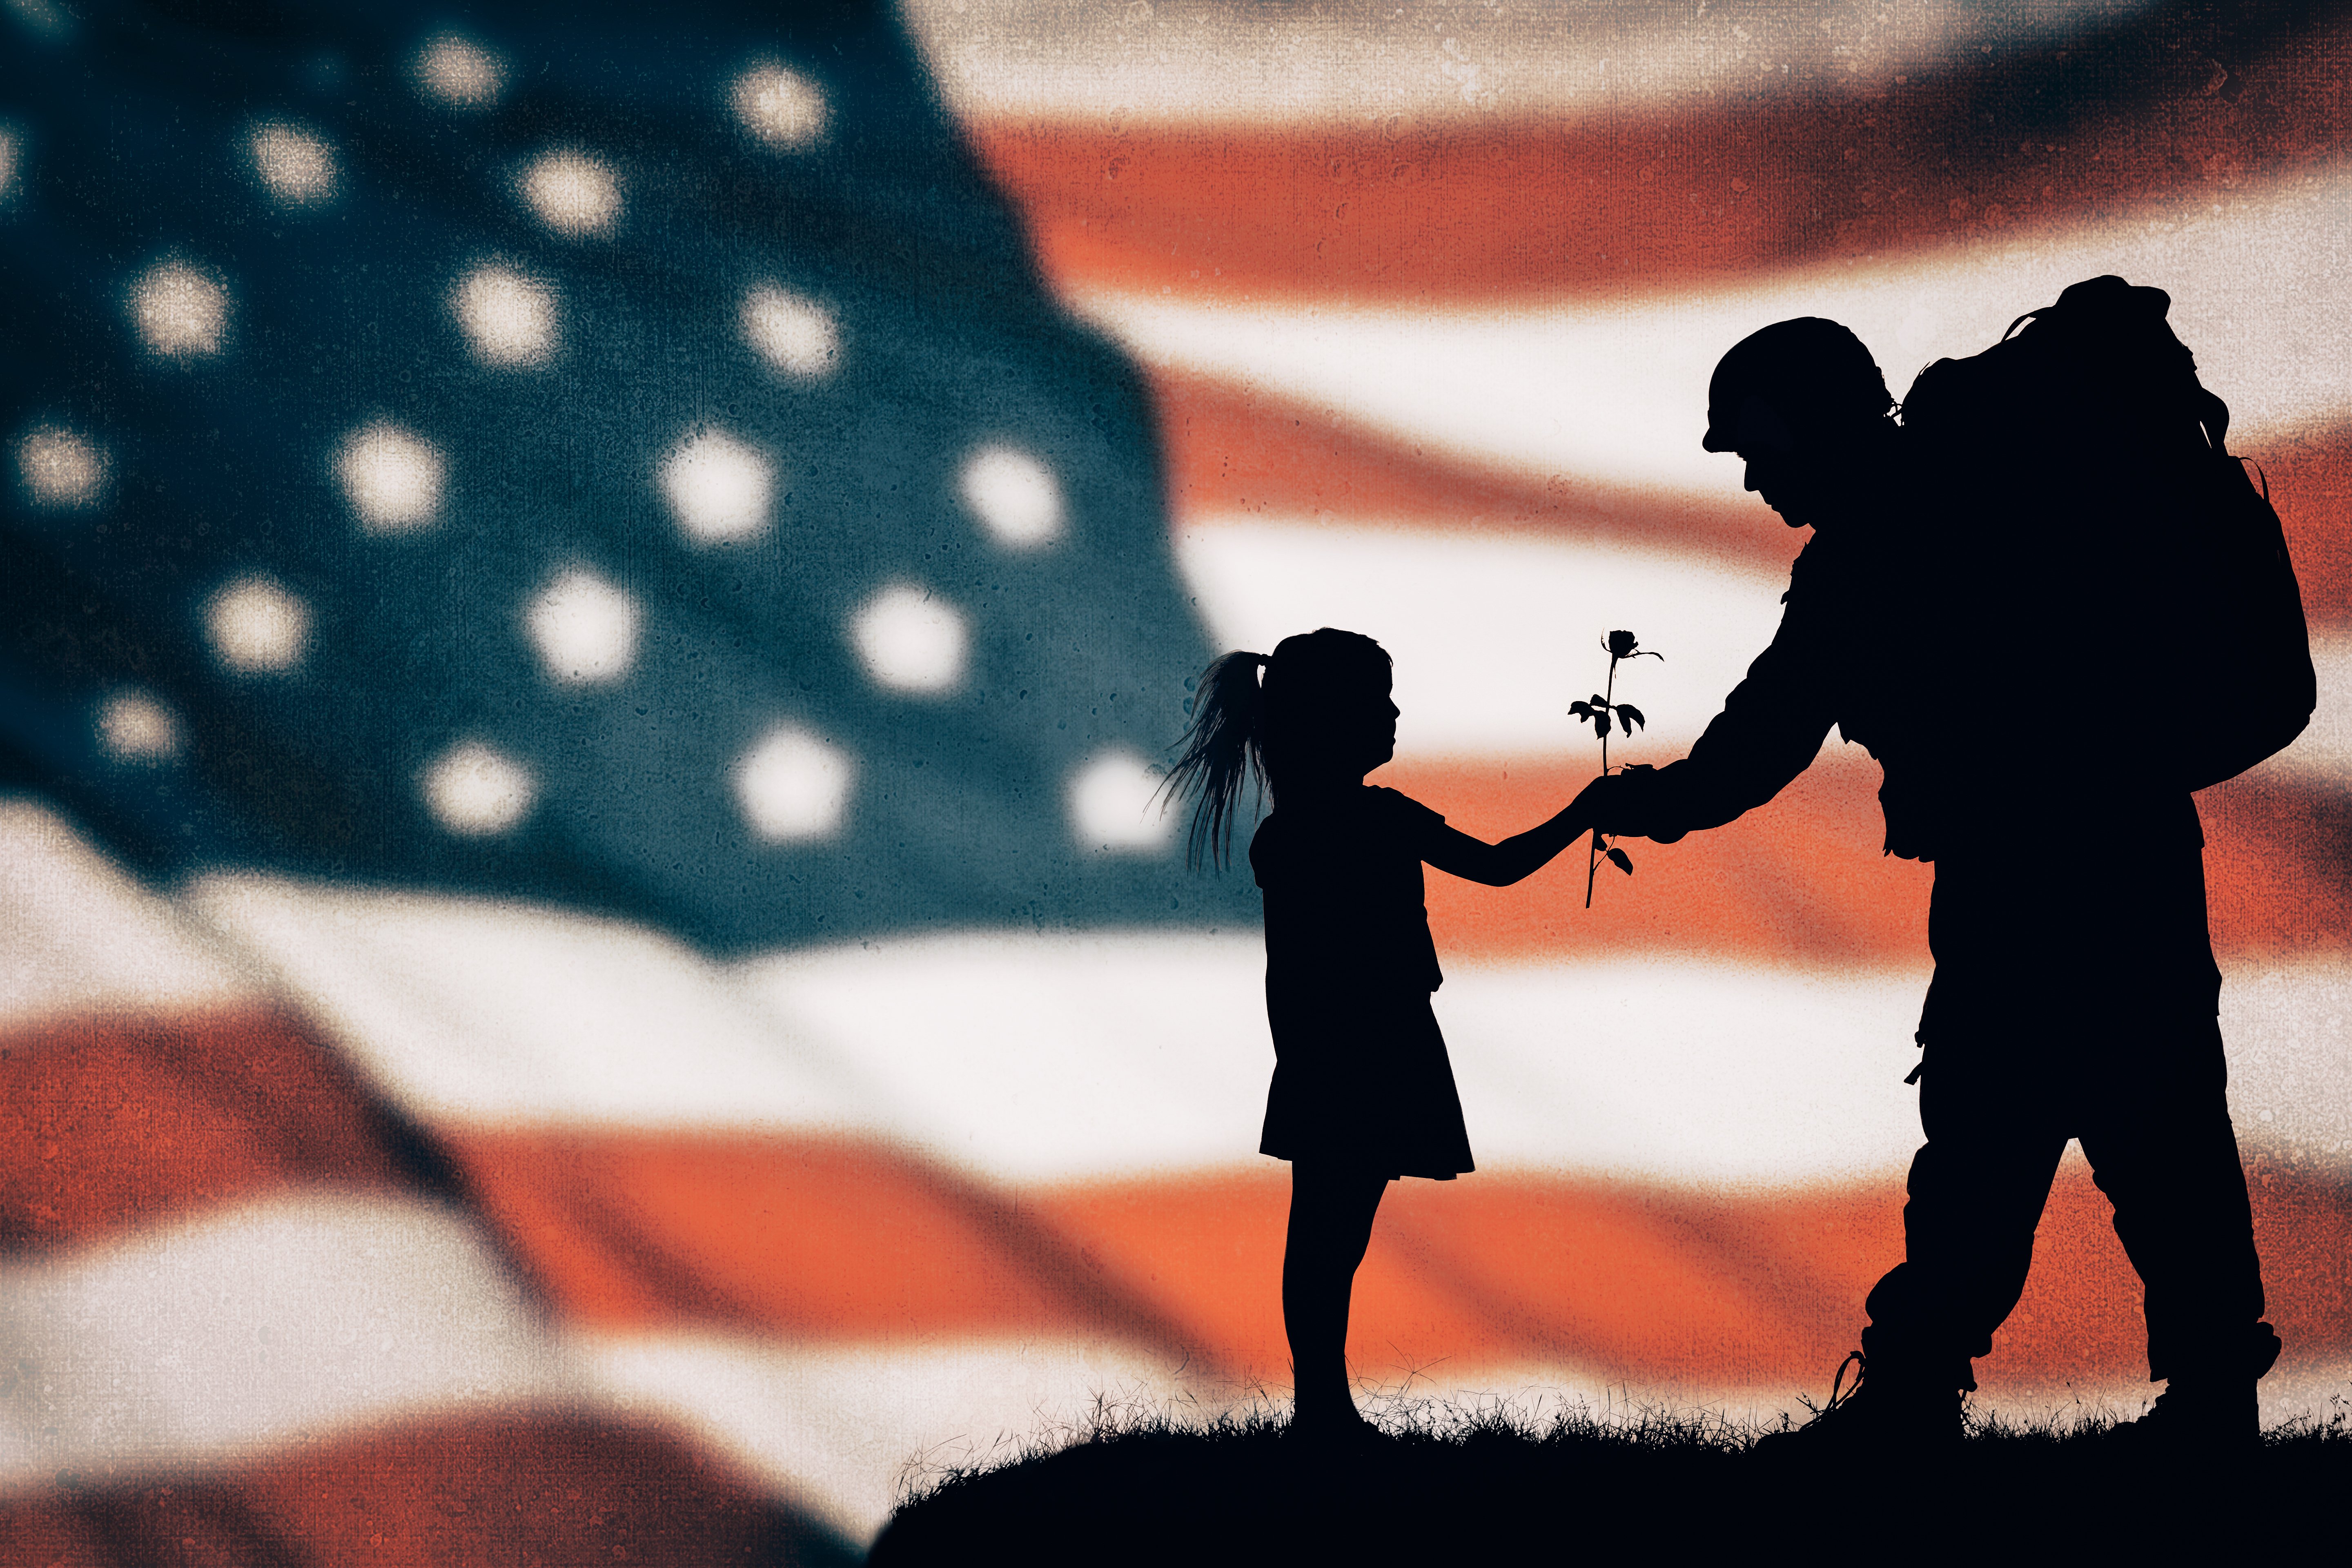 A little girl giving a rose to an American soldier | Photo: Shutterstock